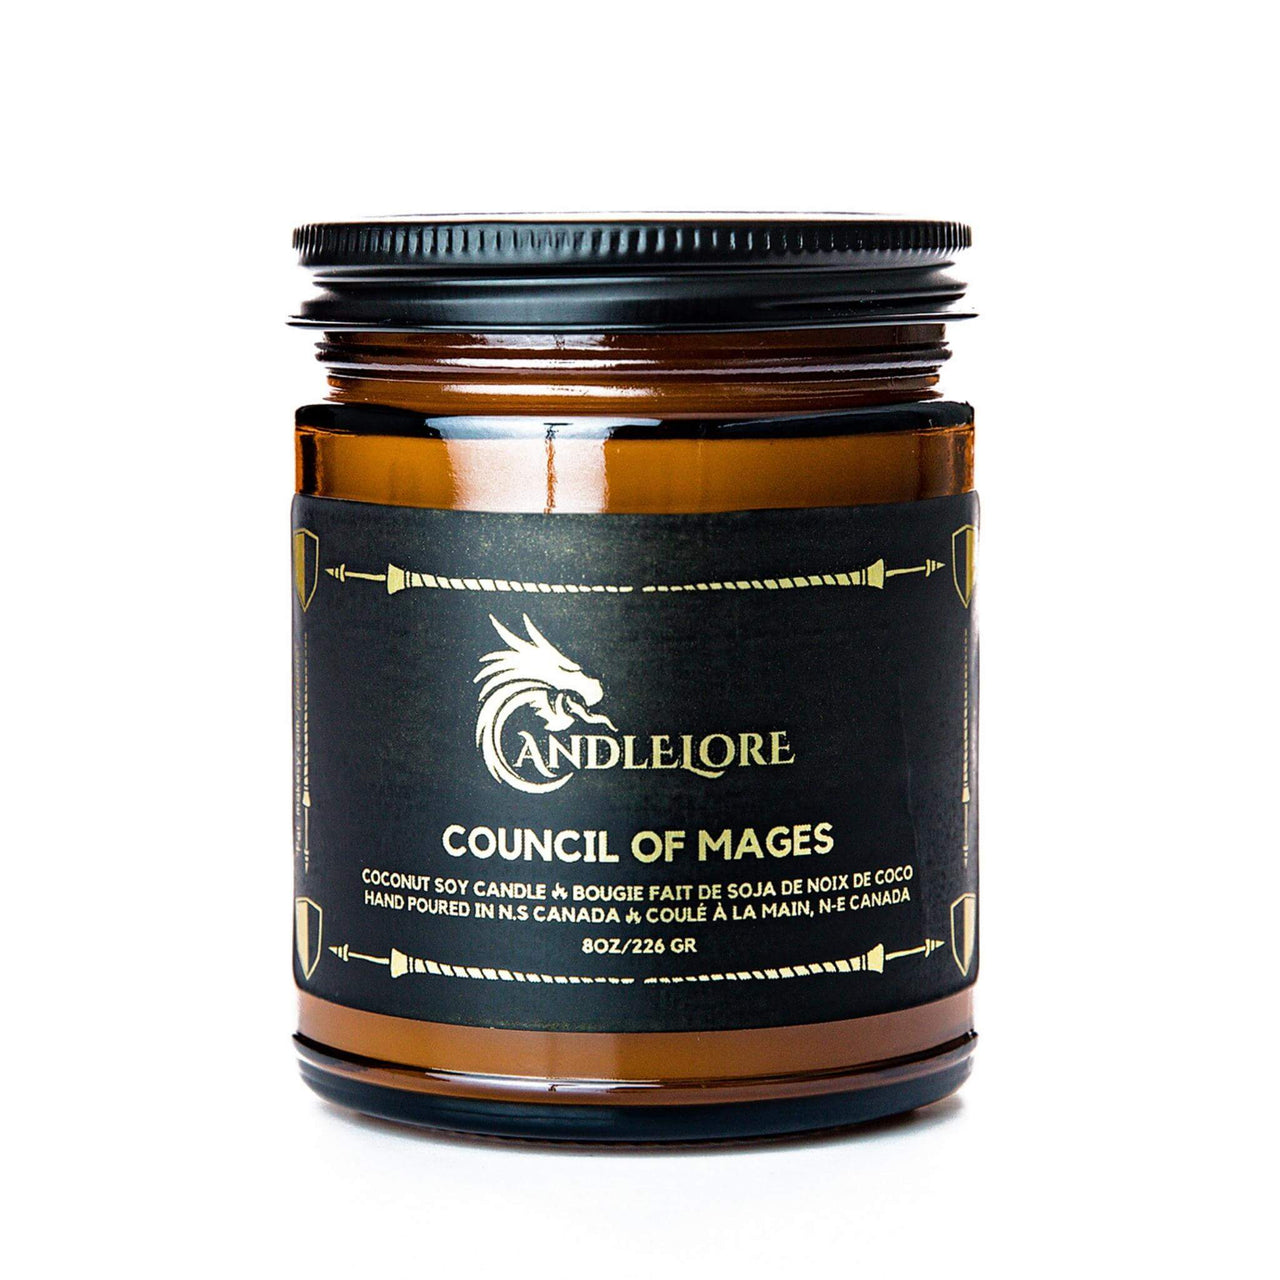 Medium Council Of Mages scented candle on a white background